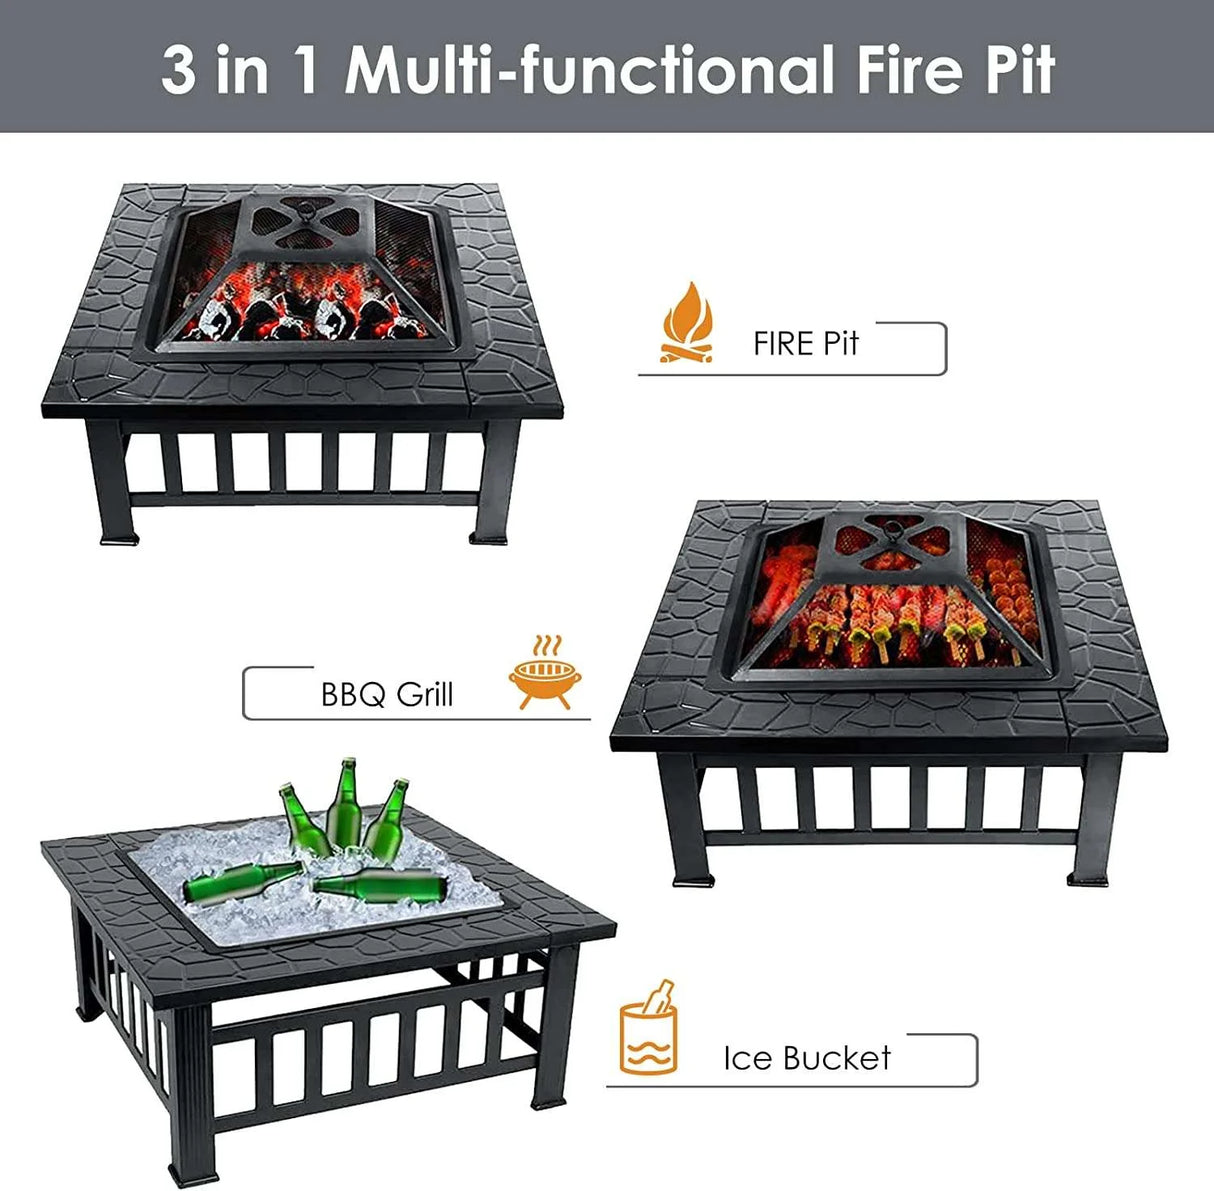 32 Inch Square Fire Pit - Stay Warm and Entertained Outdoors with Our Wood Burning Firepit - Includes Waterproof Cover, Poker, Grill, and Spark Screen 32 Inch Square Fire Pit - Stay Warm and Entertained Outdoors with Our Wood Burning Firepit - Includes Waterproof Cover, Poker, Grill, and Spark Screen 3256804257127419-United States fire pit 207